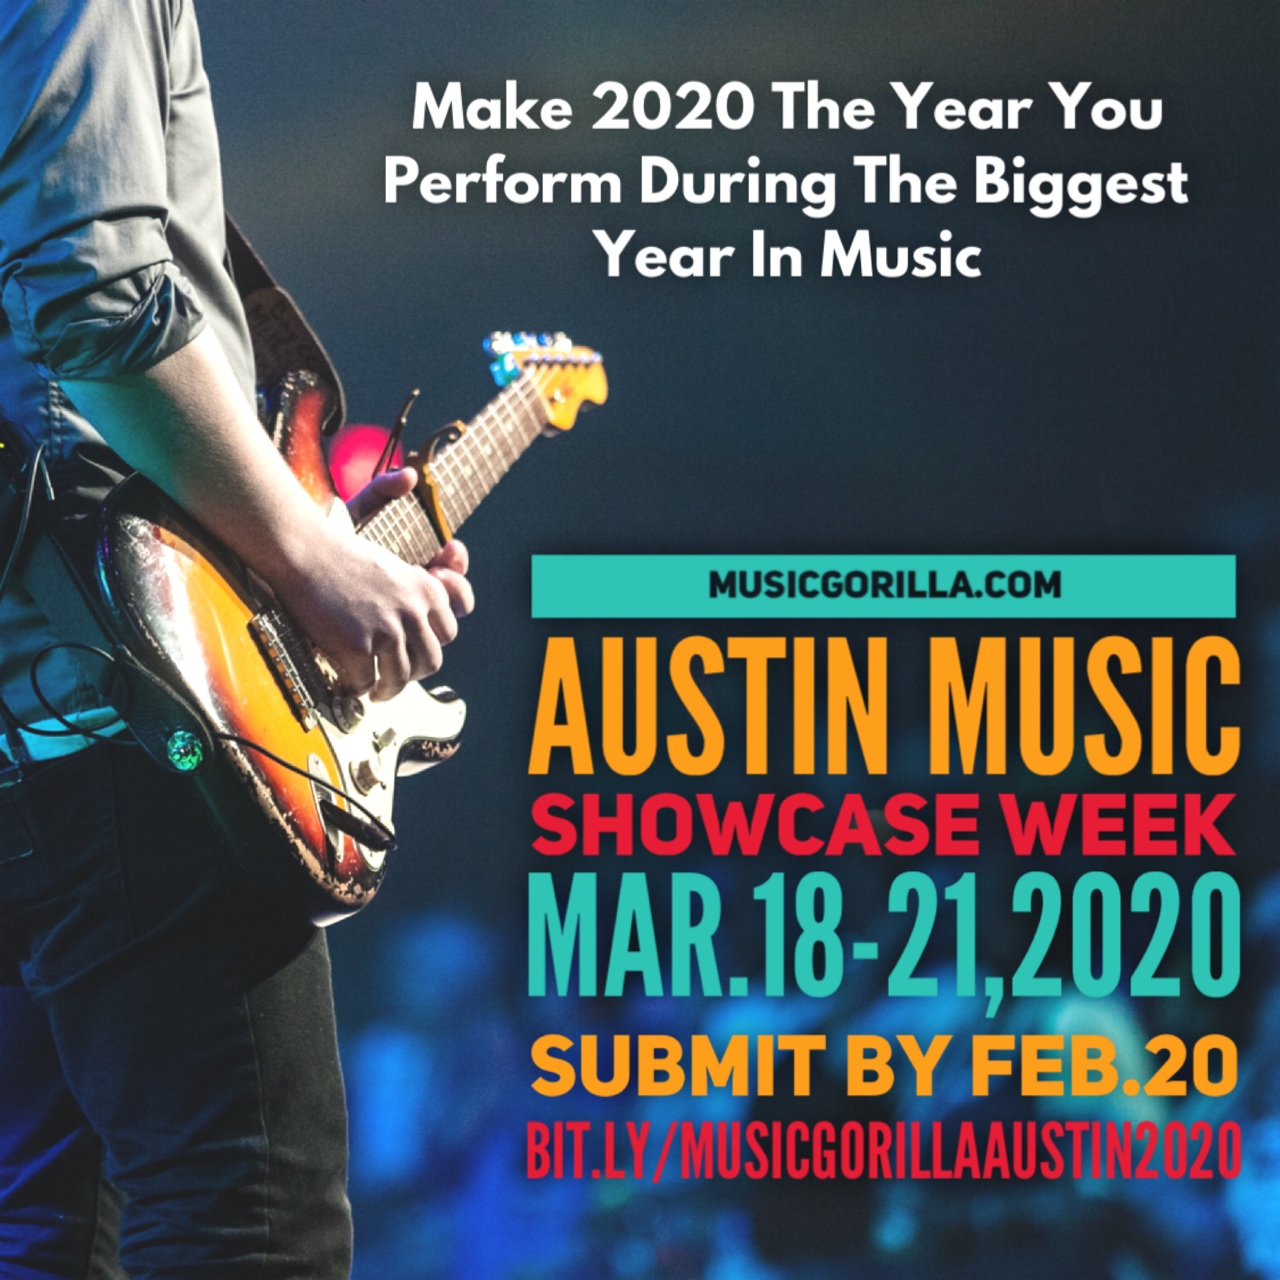 MAKE 2020 THE YEAR YOU PERFORM DURING THE BIGGEST WEEK IN MUSIC  IN AUSTIN: March 18-21, 2020